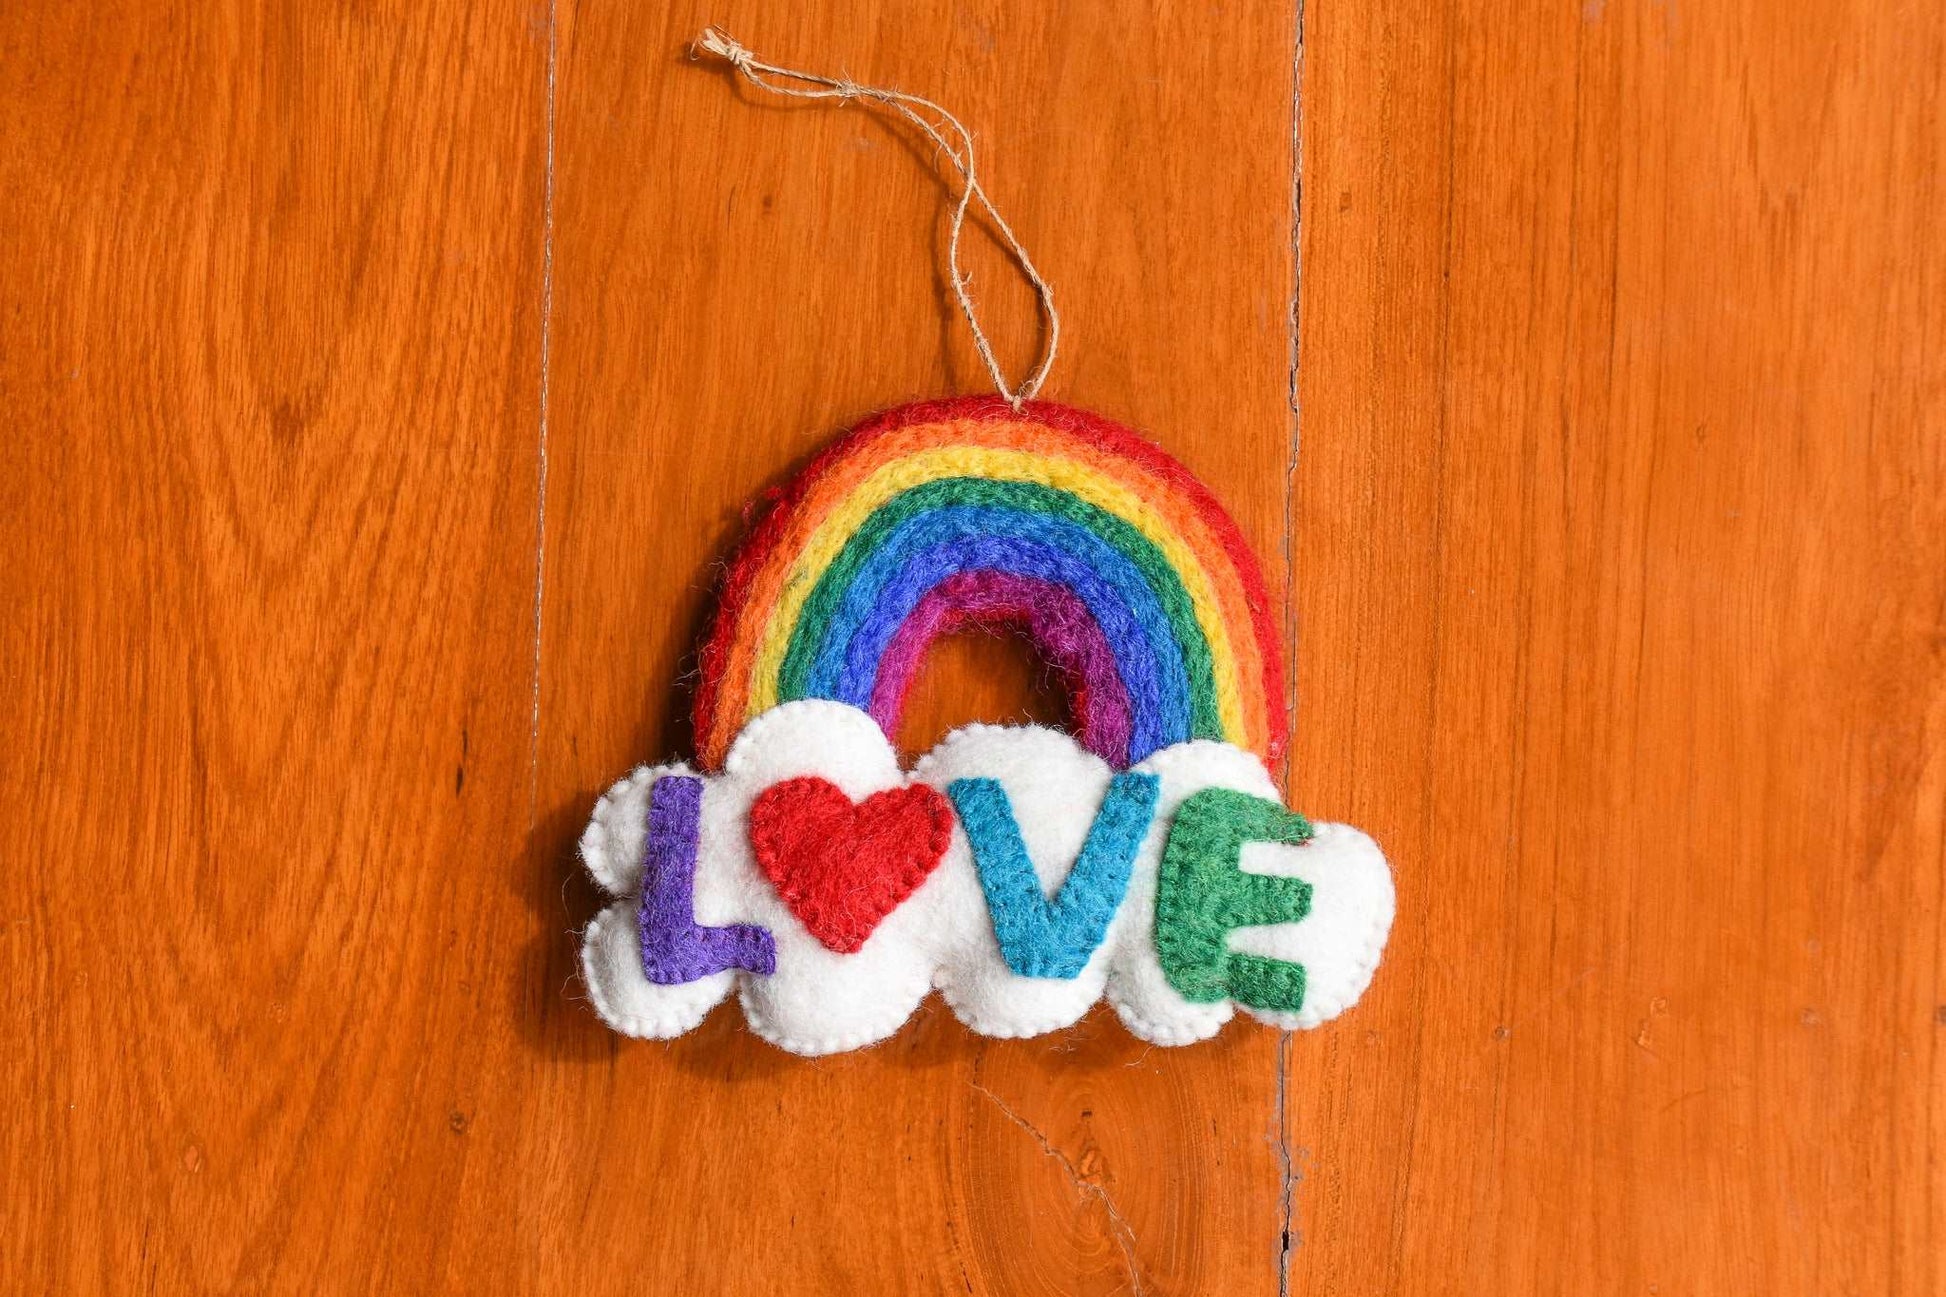 This Global Groove Life, handmade, ethical, fair trade, eco-friendly, sustainable, felt, Rainbow Love Cloud ornament, was created by artisans in Kathmandu Nepal and will be a beautiful addition to your Christmas tree this holiday season.